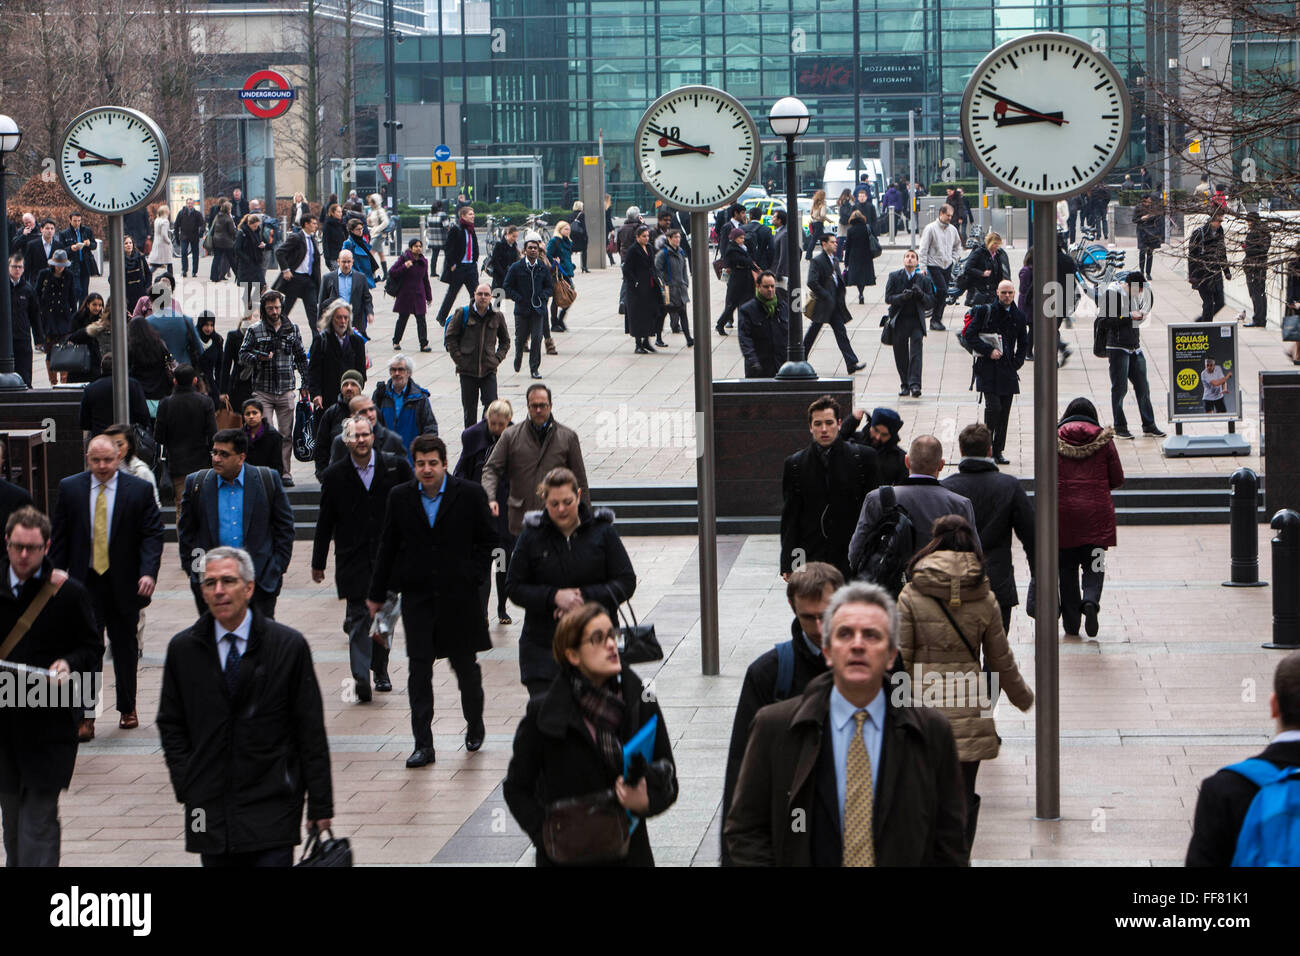 City workers walk under the clocks of Nash Court across Reuters Plaza to commute to work in Canary Wharf financial district London, England, United Kingdom. Stock Photo